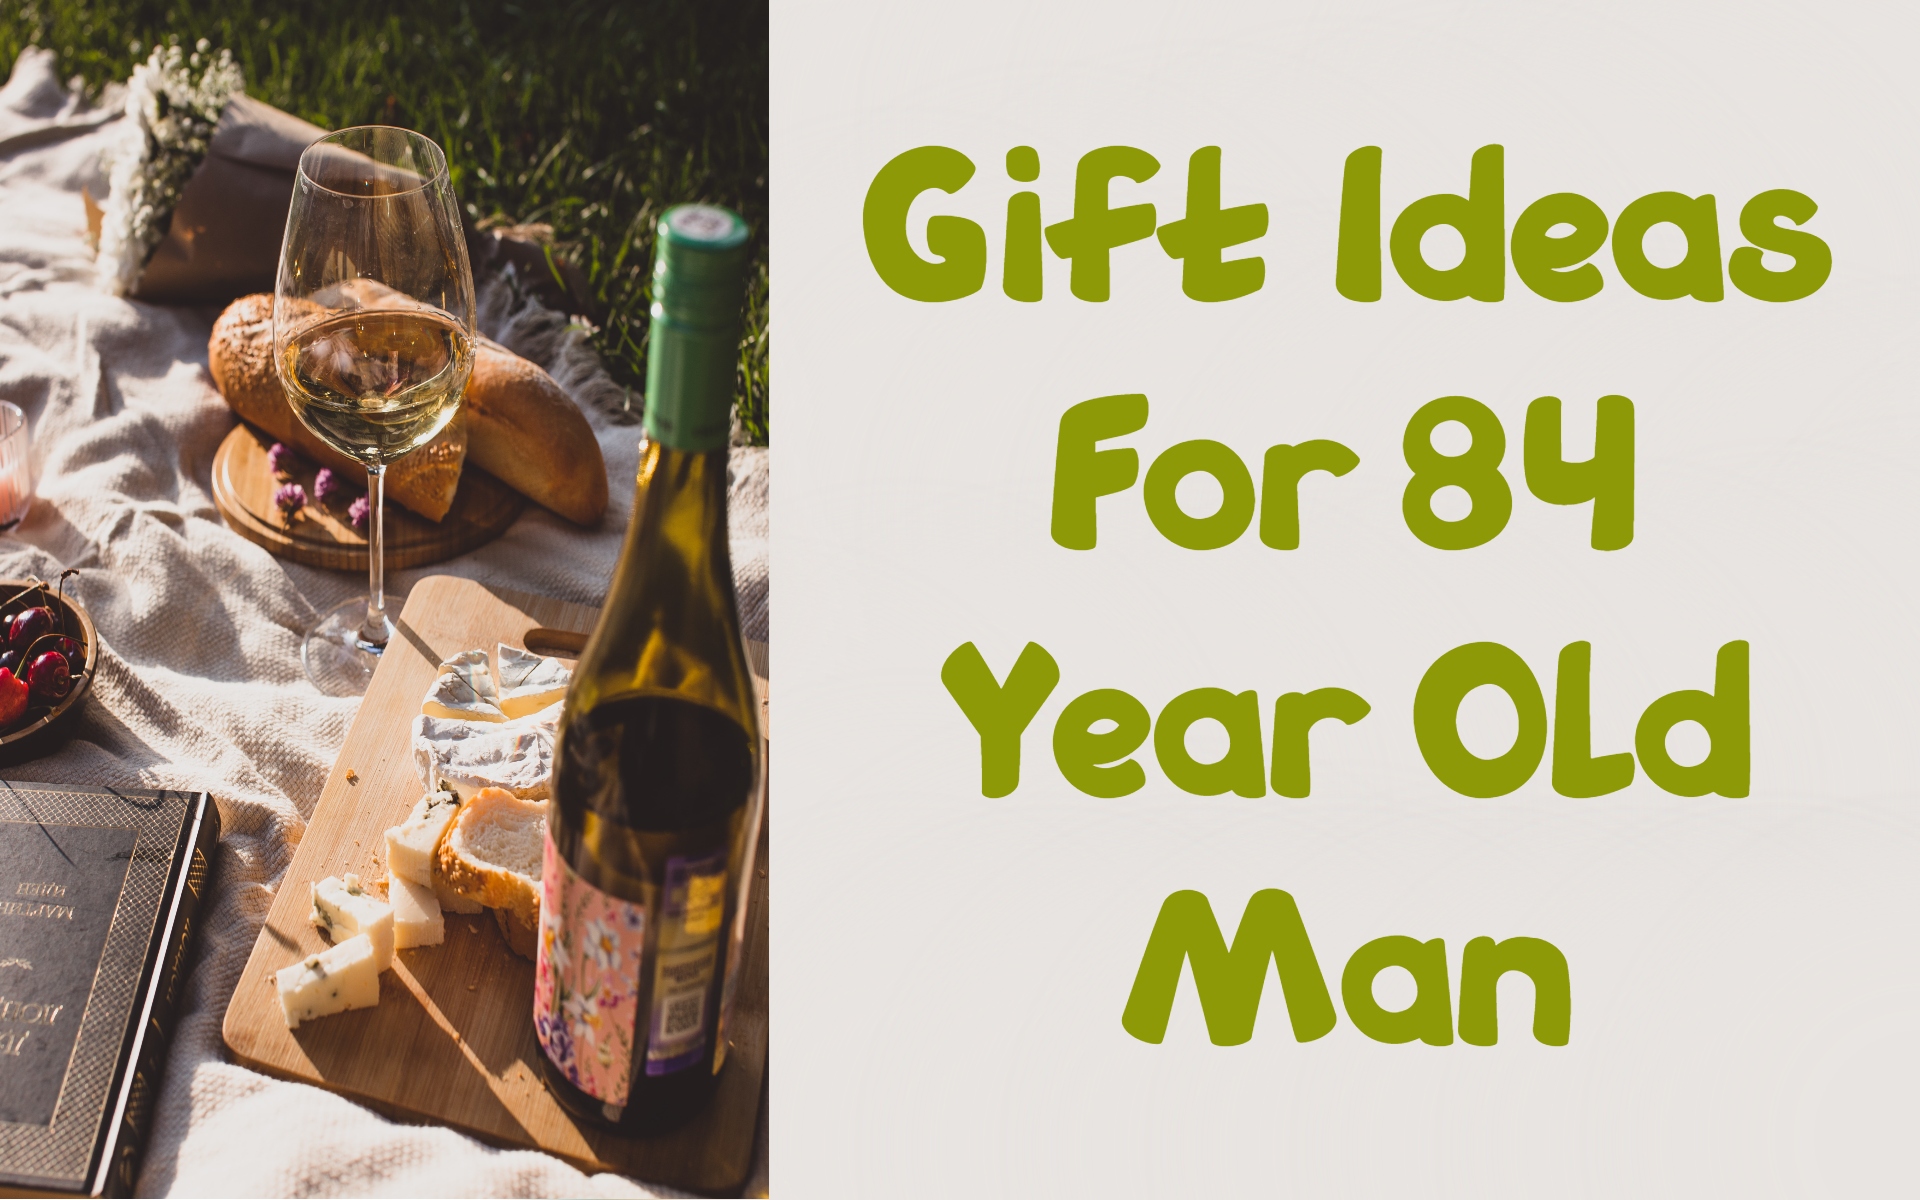 Cover image of gift ideas for 84-year-old man by Giftsedge